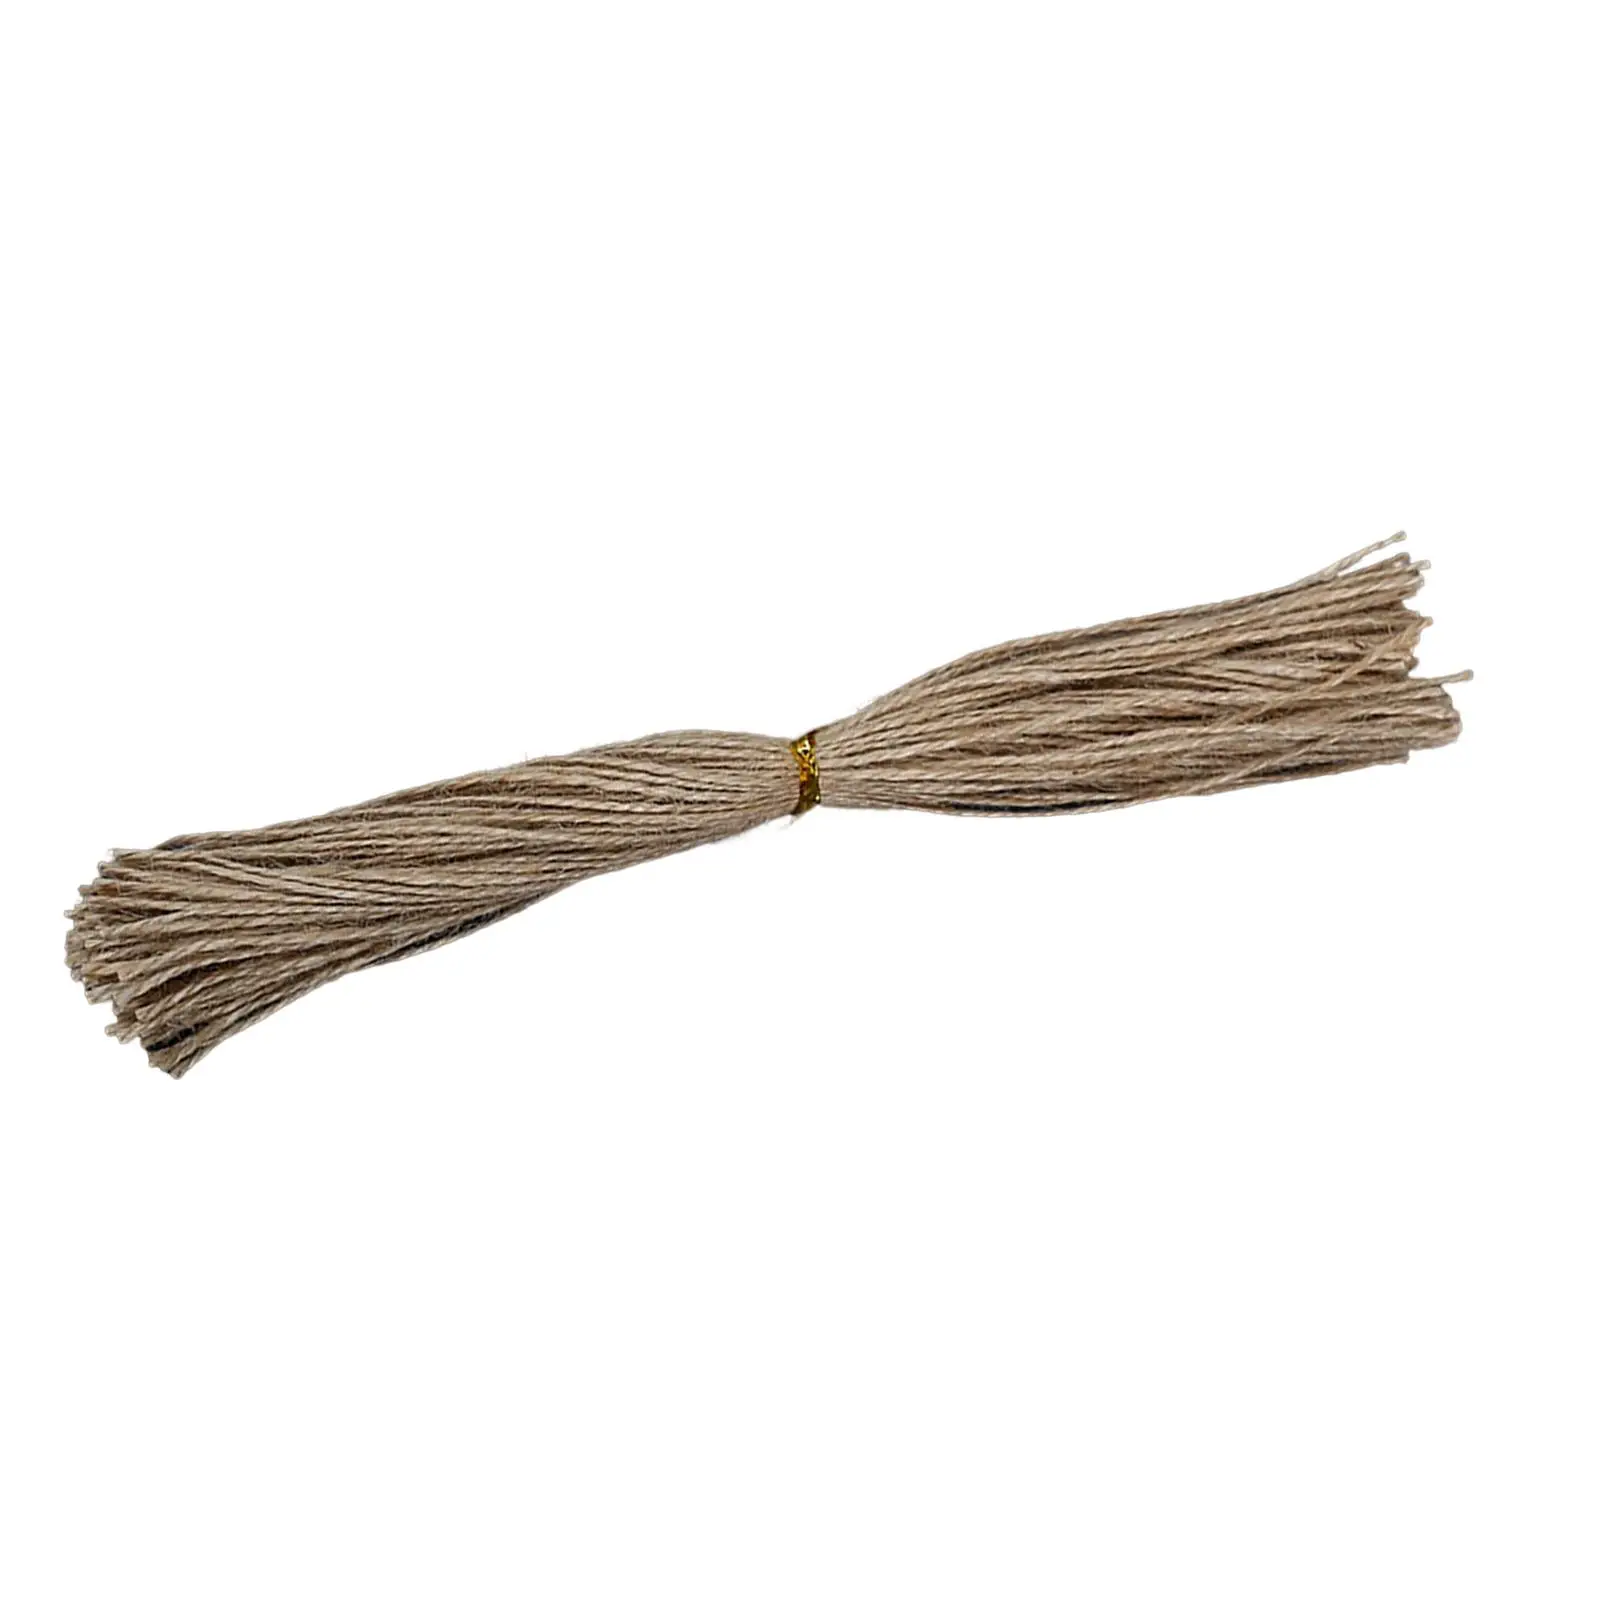 1.5mm Fine Jute Twine, Craft Twine Rope for Gift Wrap DIY Crafts Tying Cake Box Artworks Tags